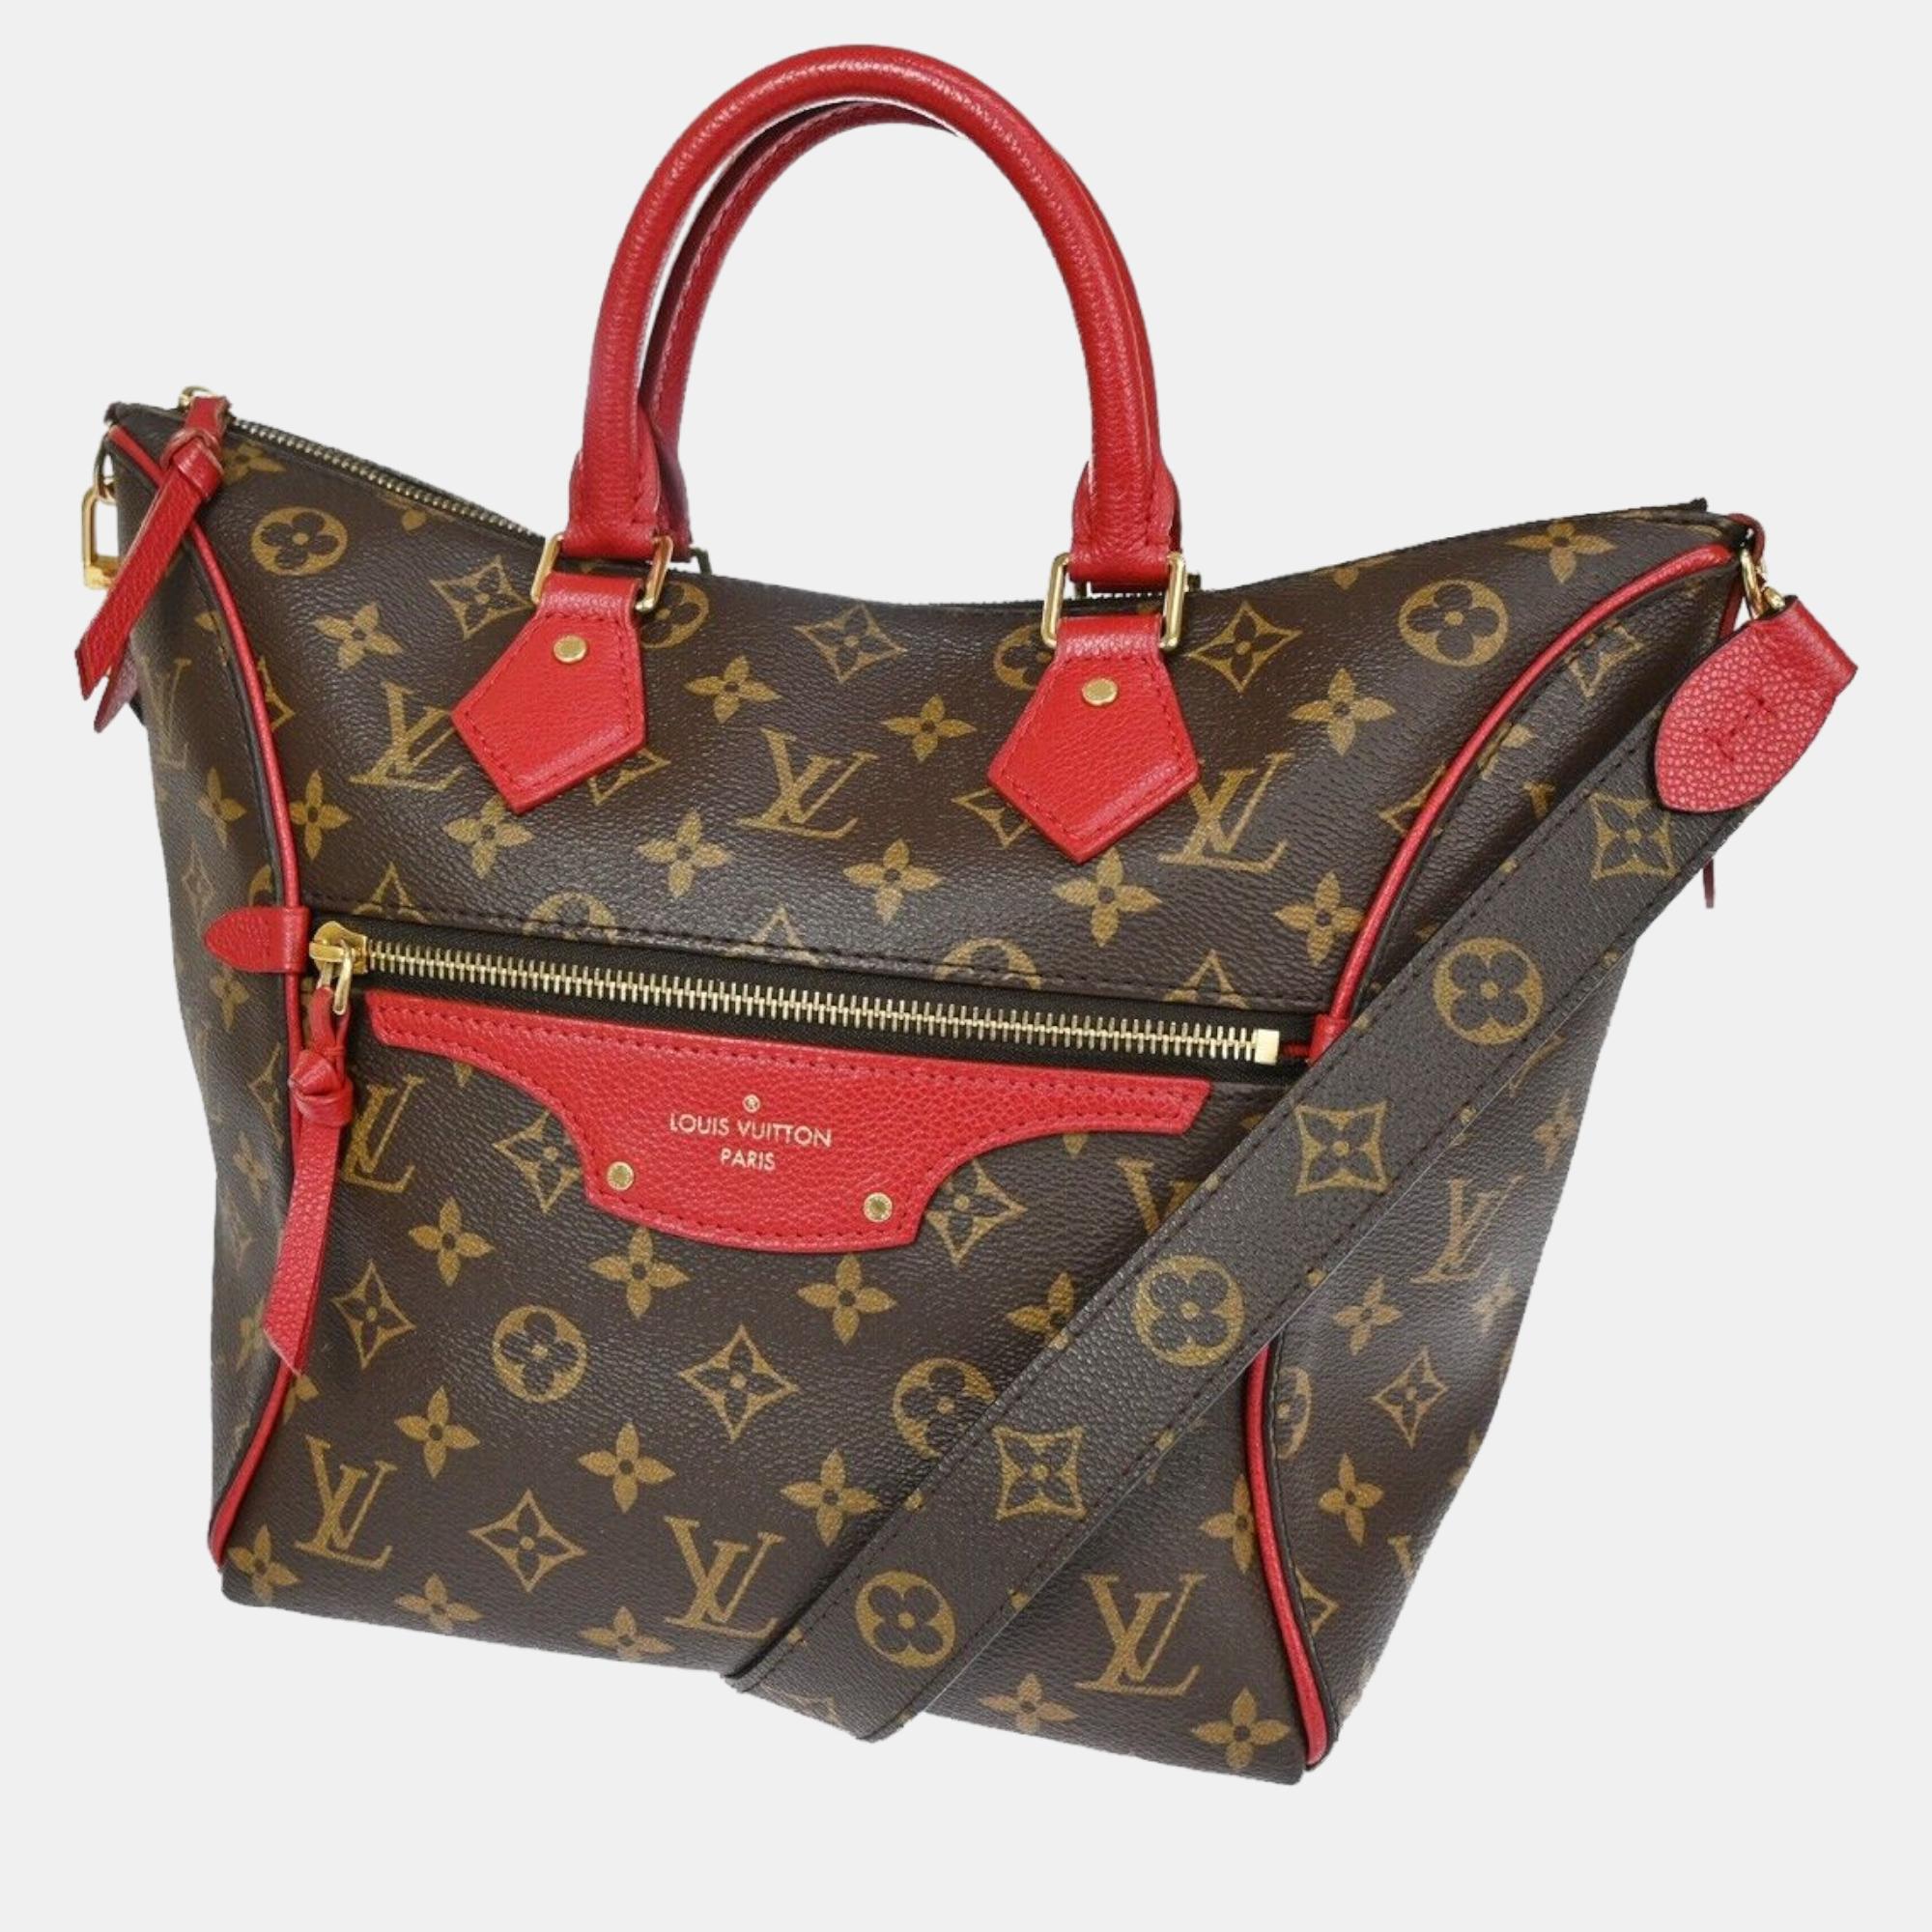 

Louis Vuitton Red and Leather Monogram Canvas Tournelle PM Tote Bag, Brown